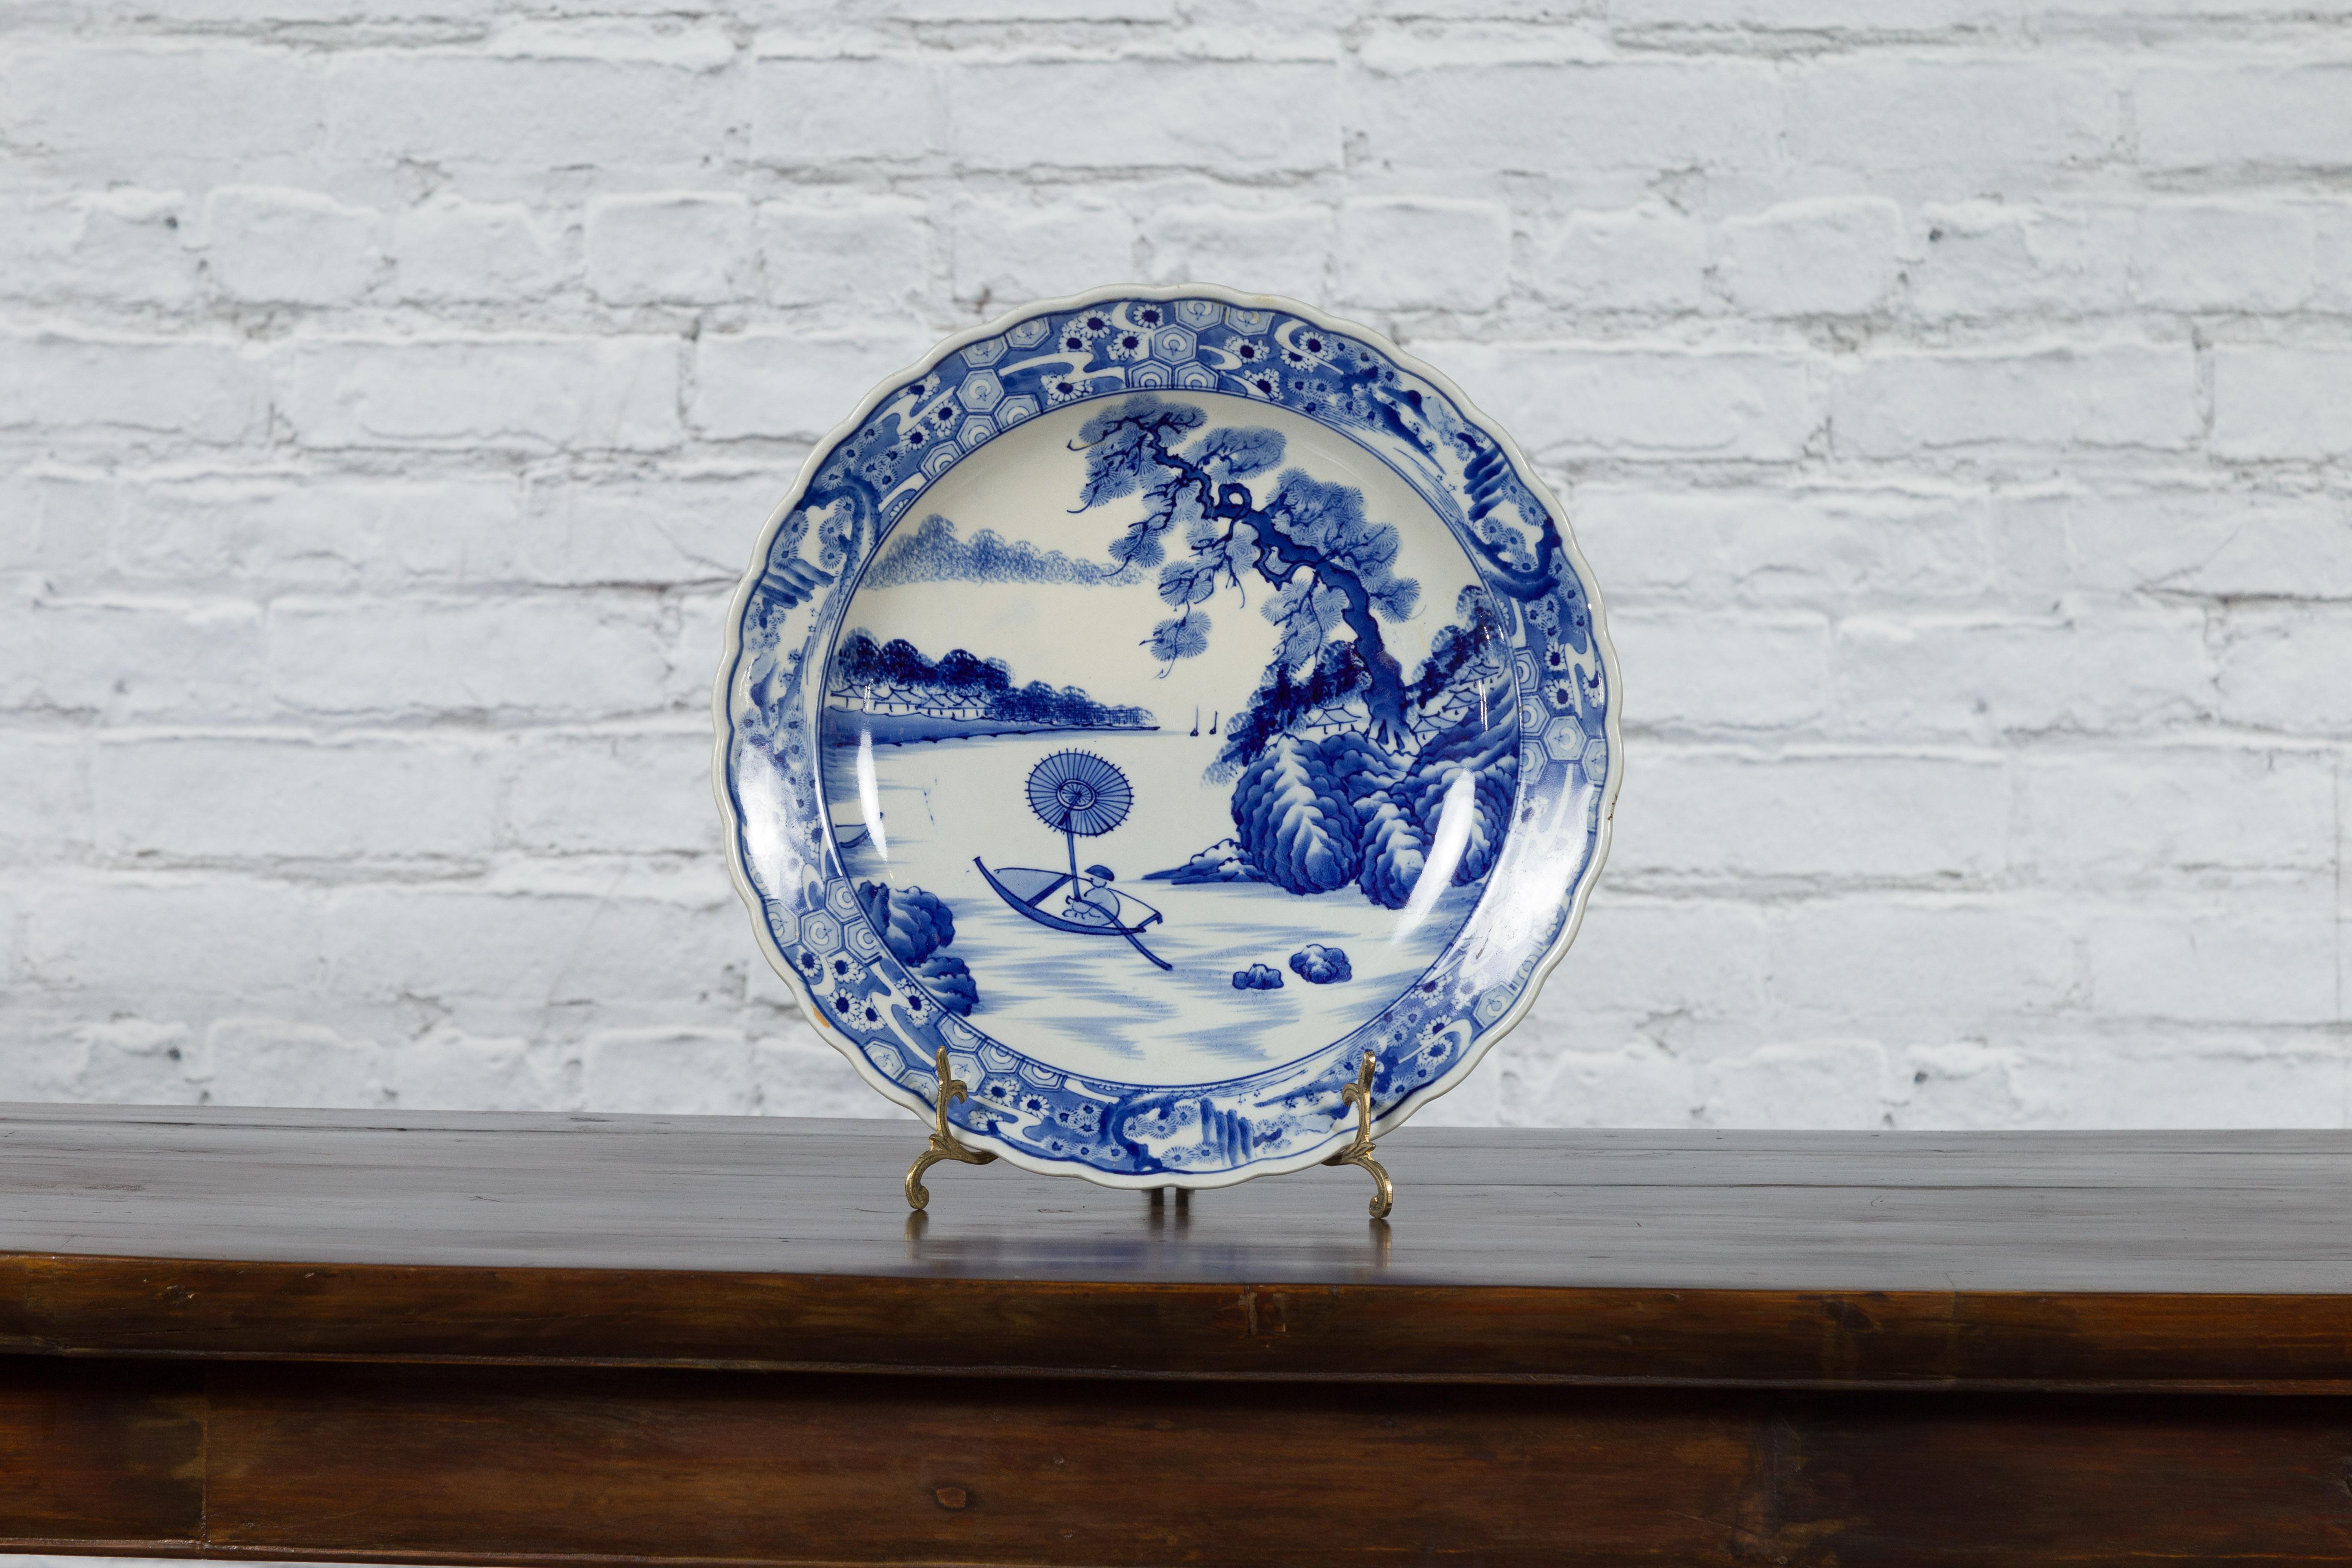 A Japanese Imari porcelain charger plate from the 19th century, with hand-painted blue and white décor depicting a man rowing a boat. Created in Japan during the 19th century, this Imari porcelain charger plate features a delicate blue and white